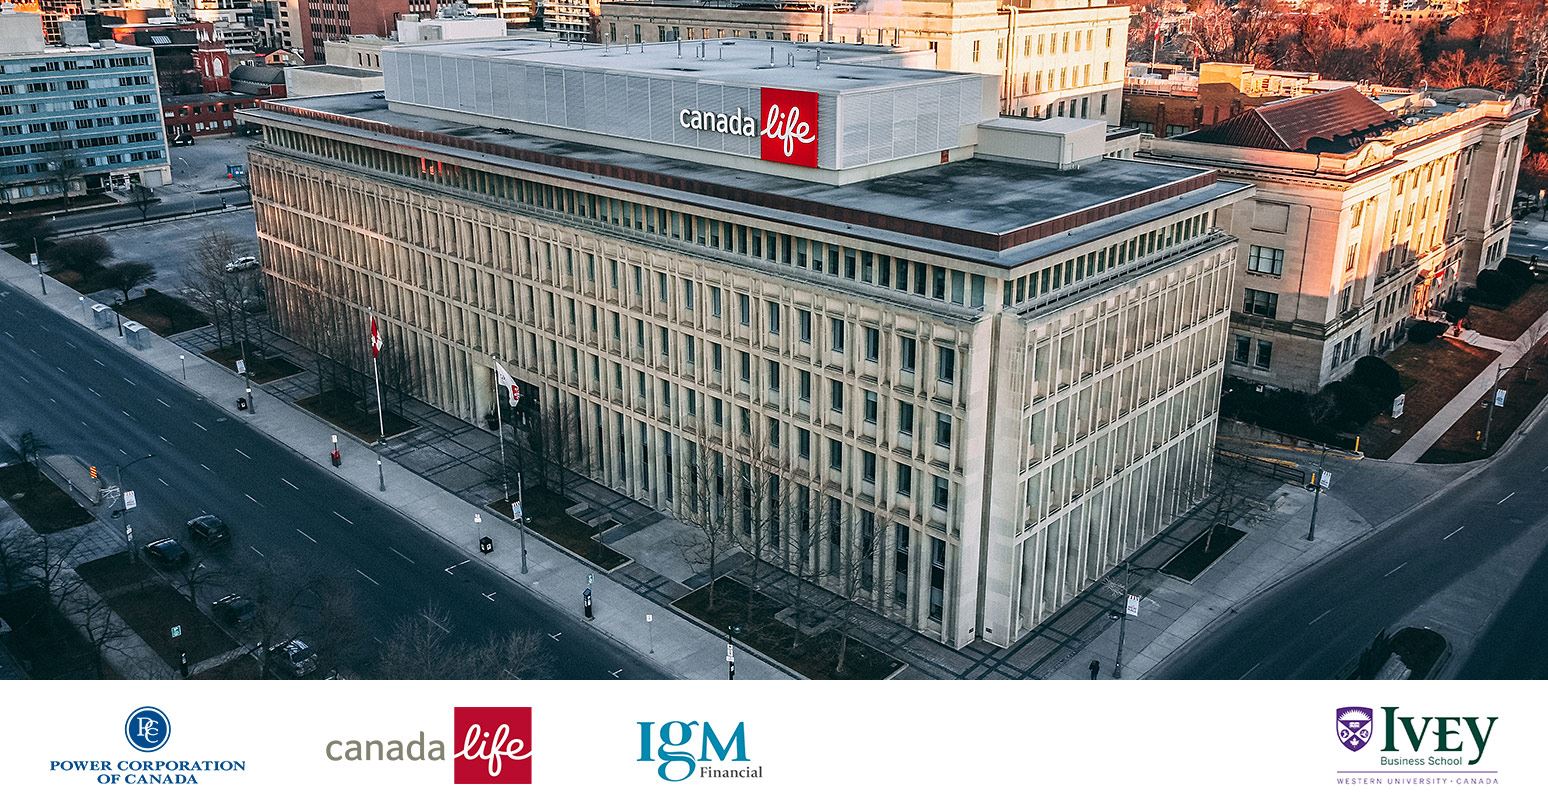 Aerial view of Canada Life building with four logos at bottom (l-r): Power Corporation of Canada, Canada Life, IGM Financial, Ivey Business School